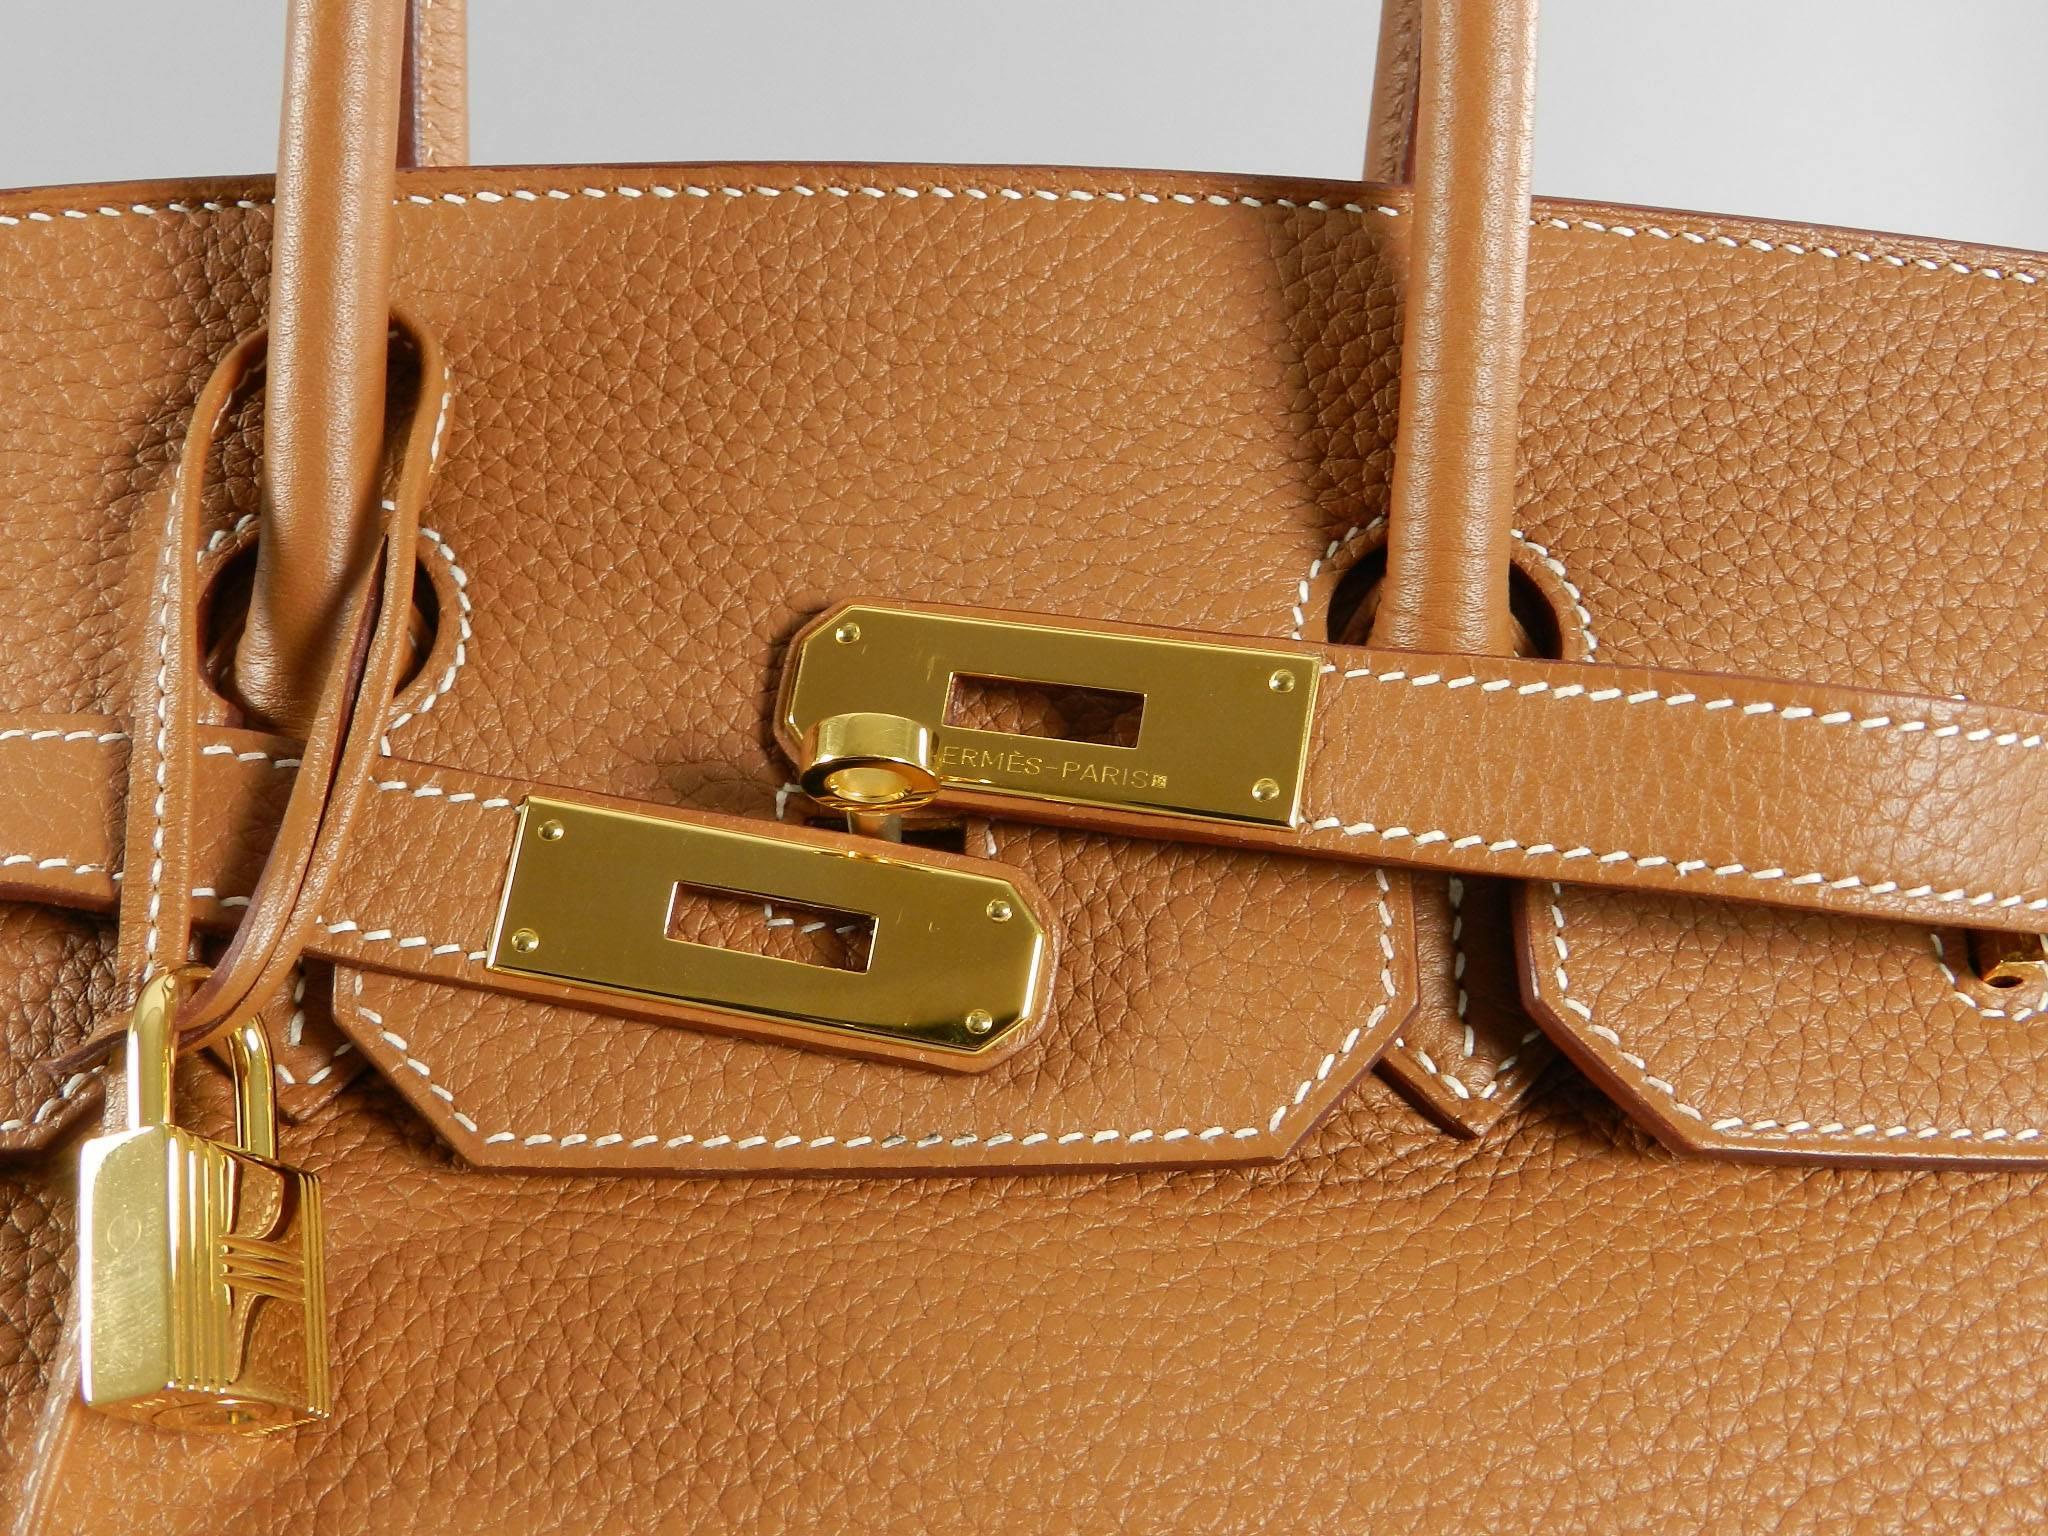 Hermes Birkin 35 Gold in Togo Leather with Gold Hardware 2